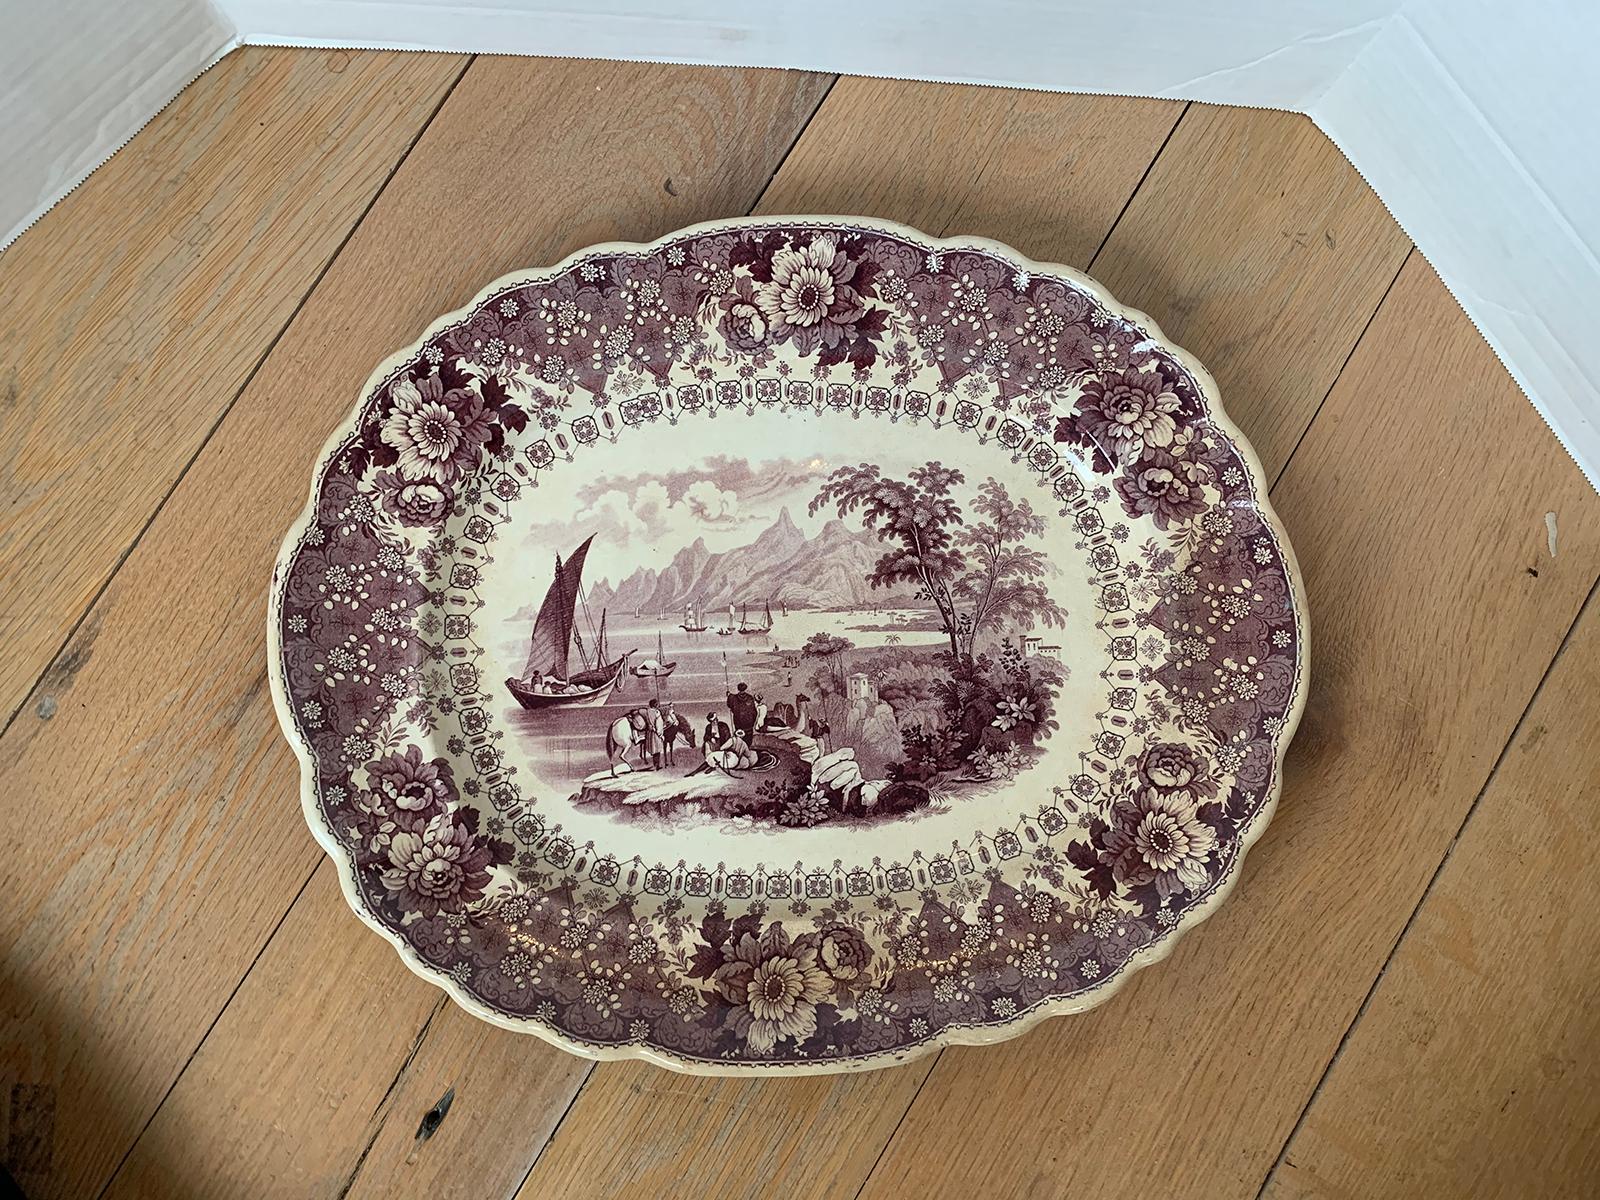 Early 19th century circa 1830s English Staffordshire purple and white transferware porcelain charger or meat platter in 